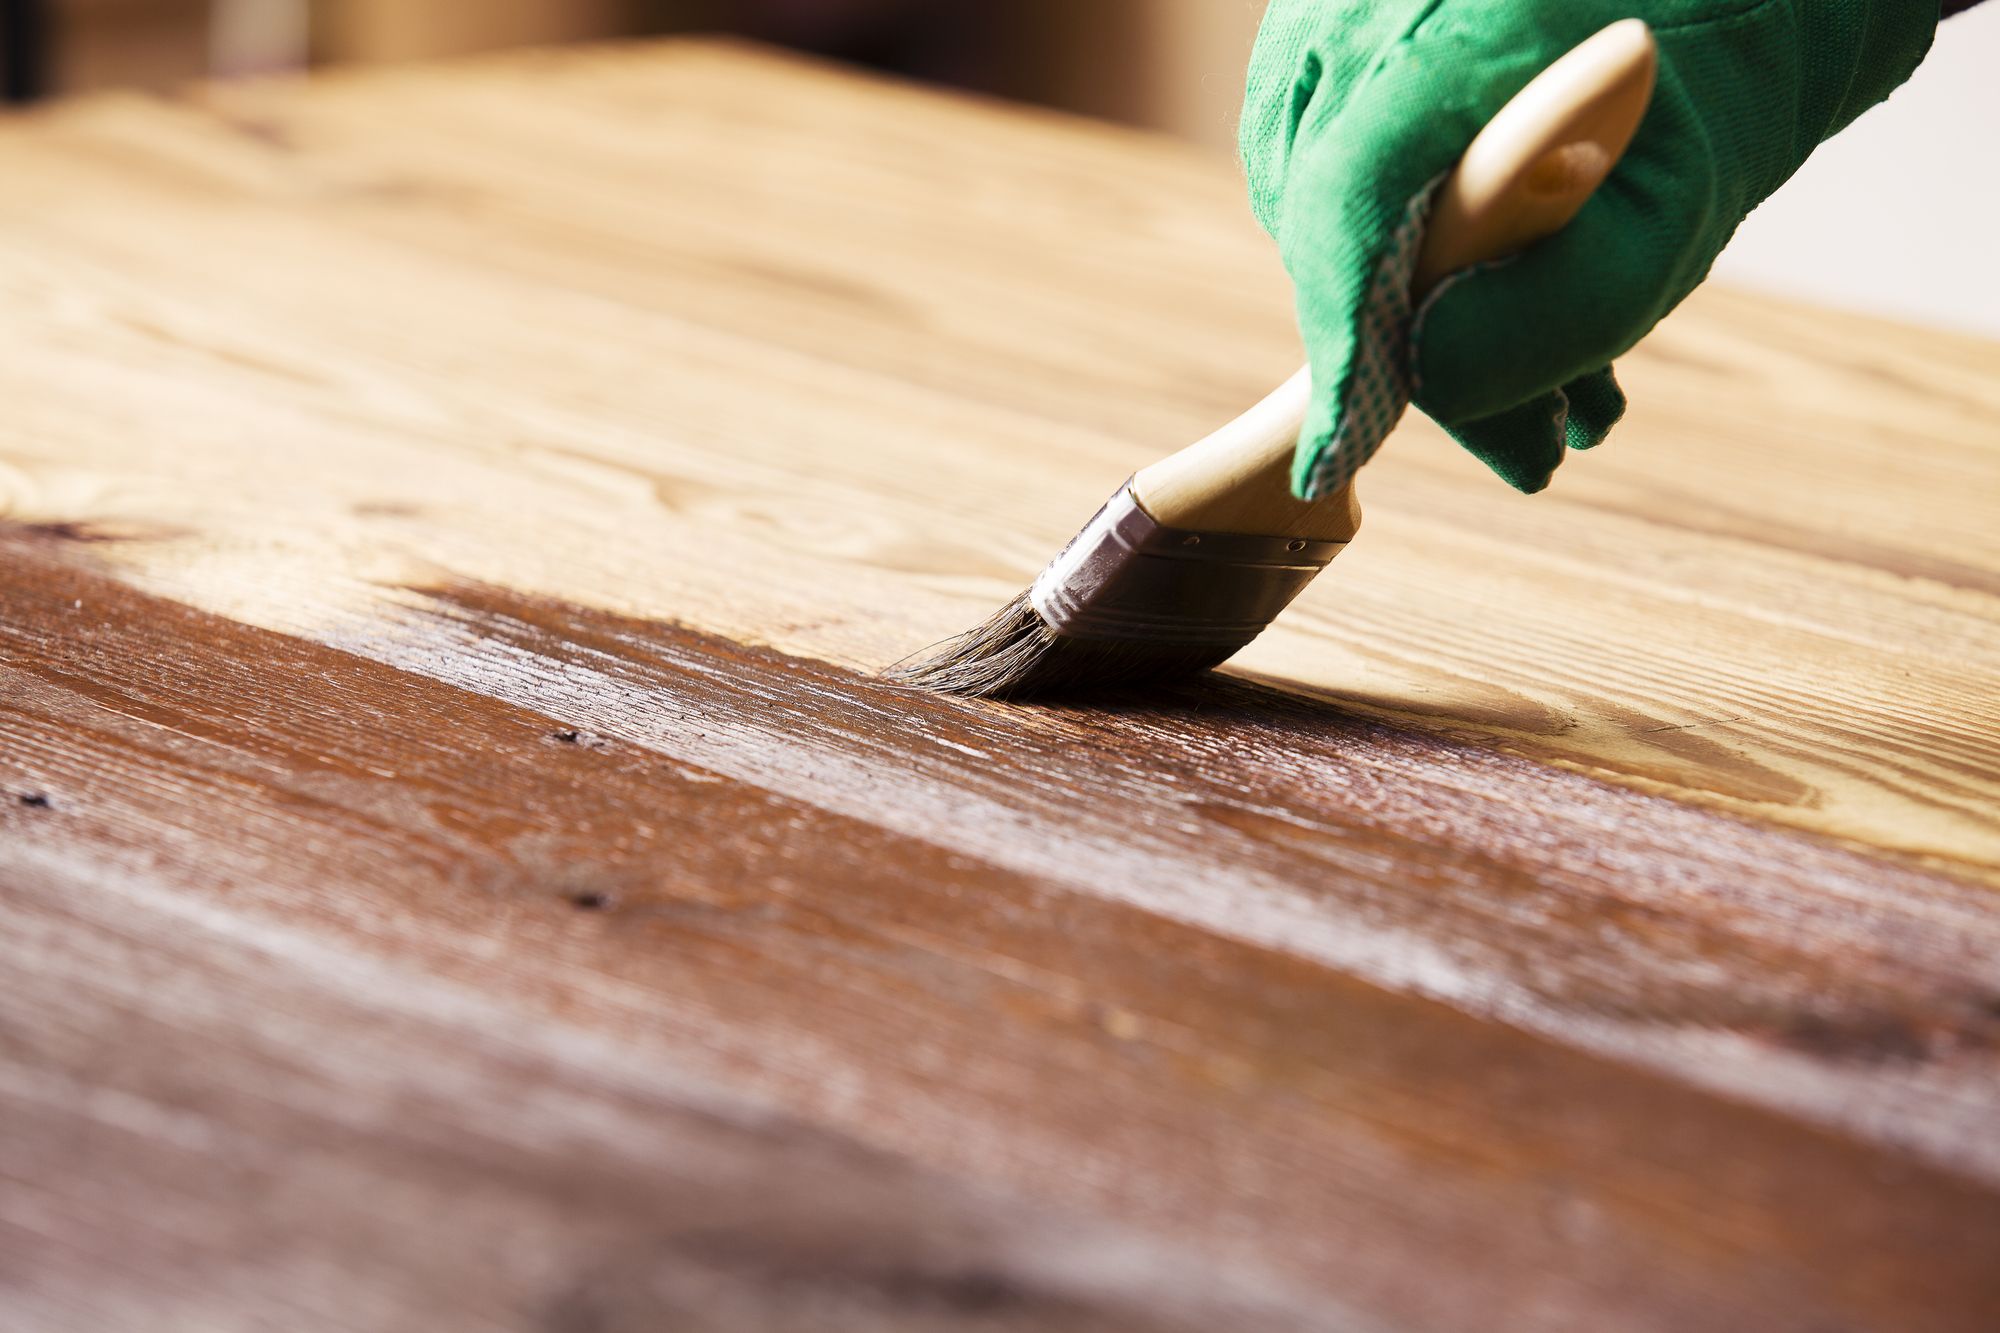 SherwinWilliams Class Action Says Deck Stain Prone to Peeling Top